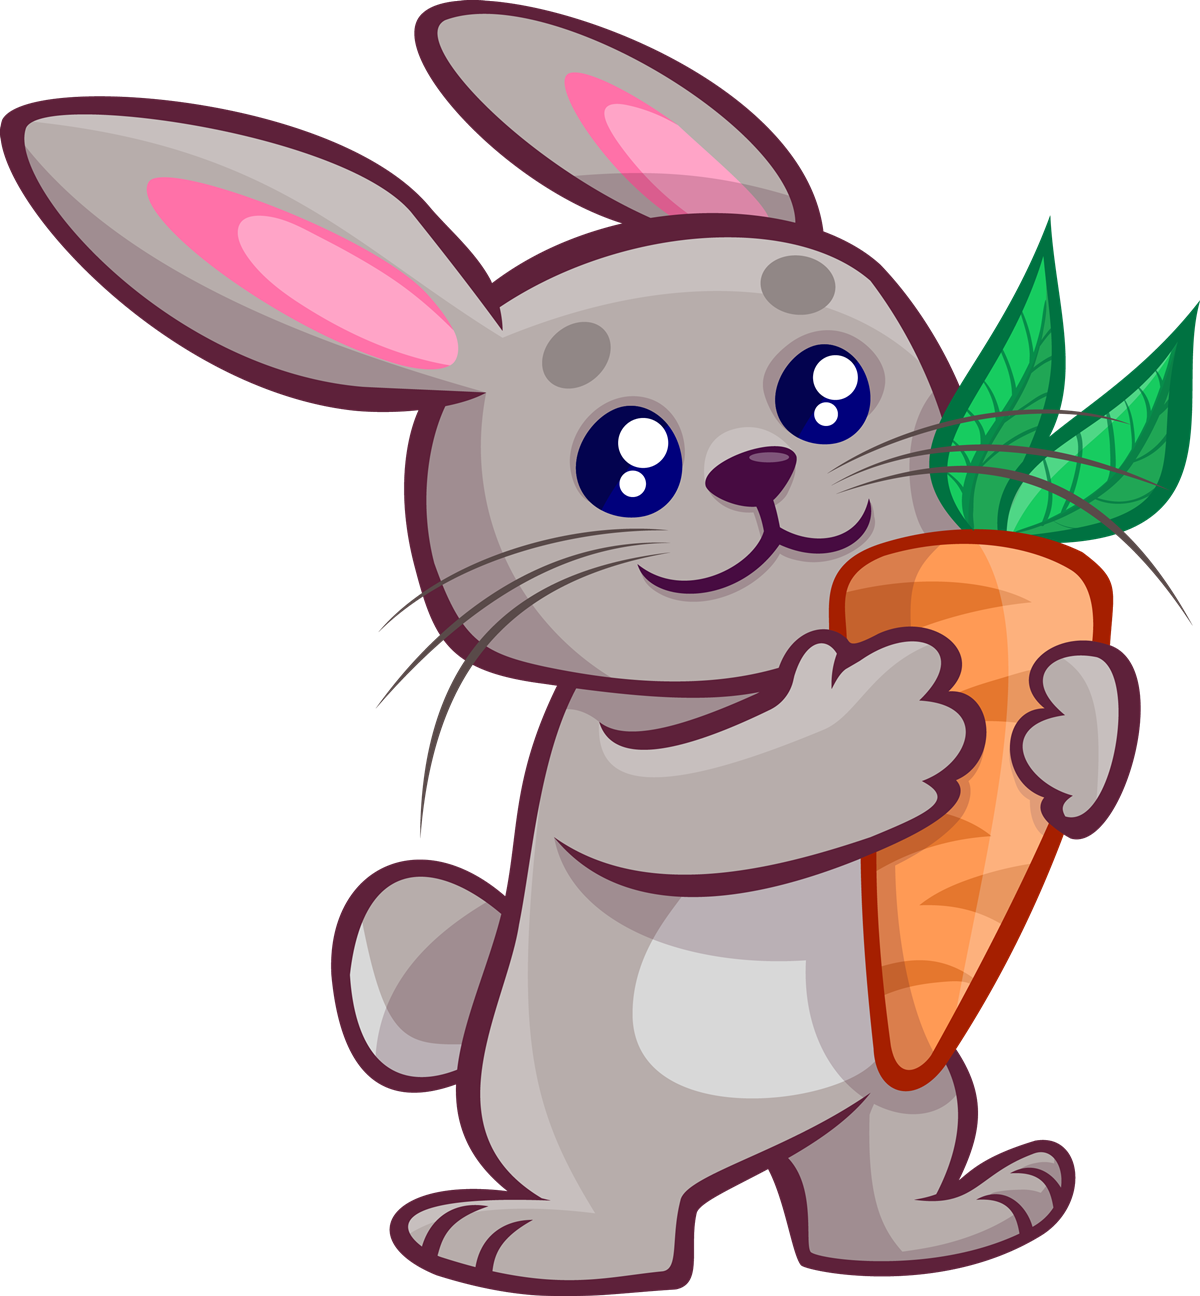 Cartoon Rabbit Image | Free download on ClipArtMag